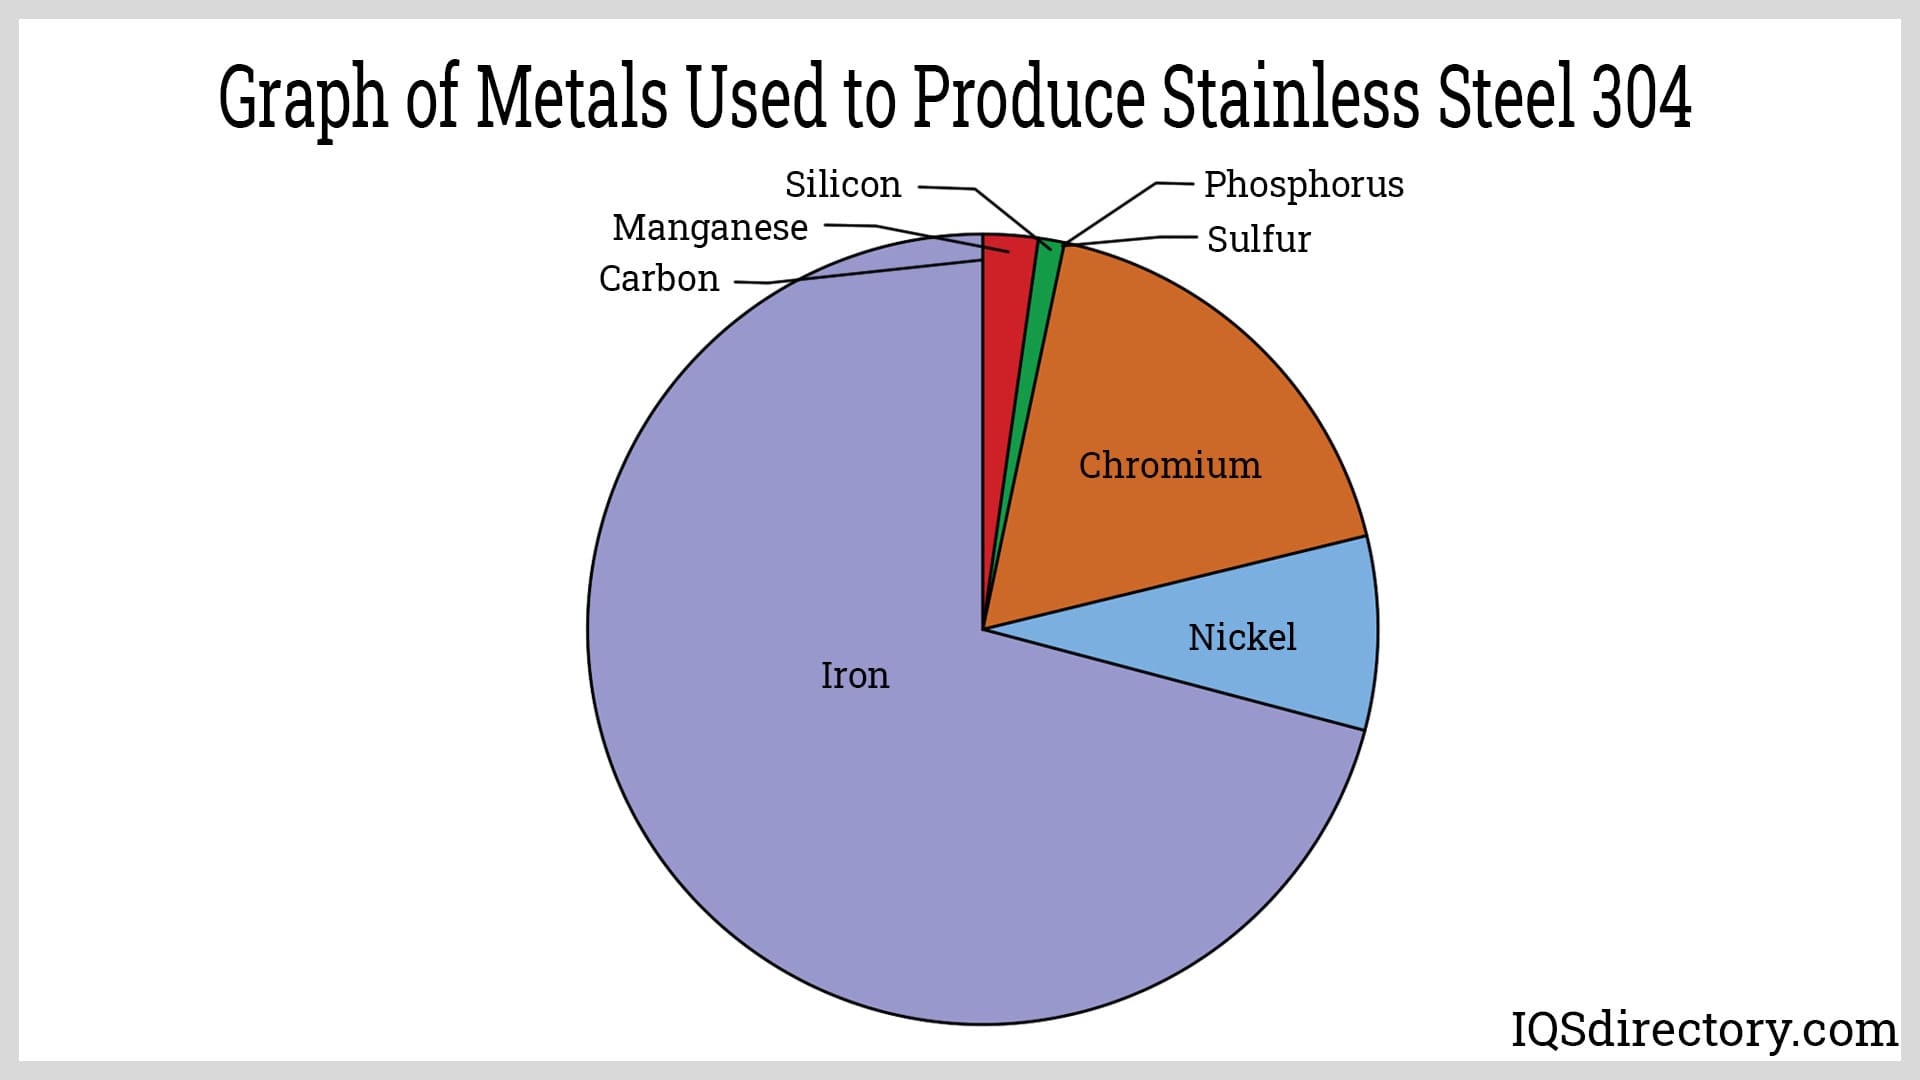 Graph of Metals Used to Produce Stainless Steel 304